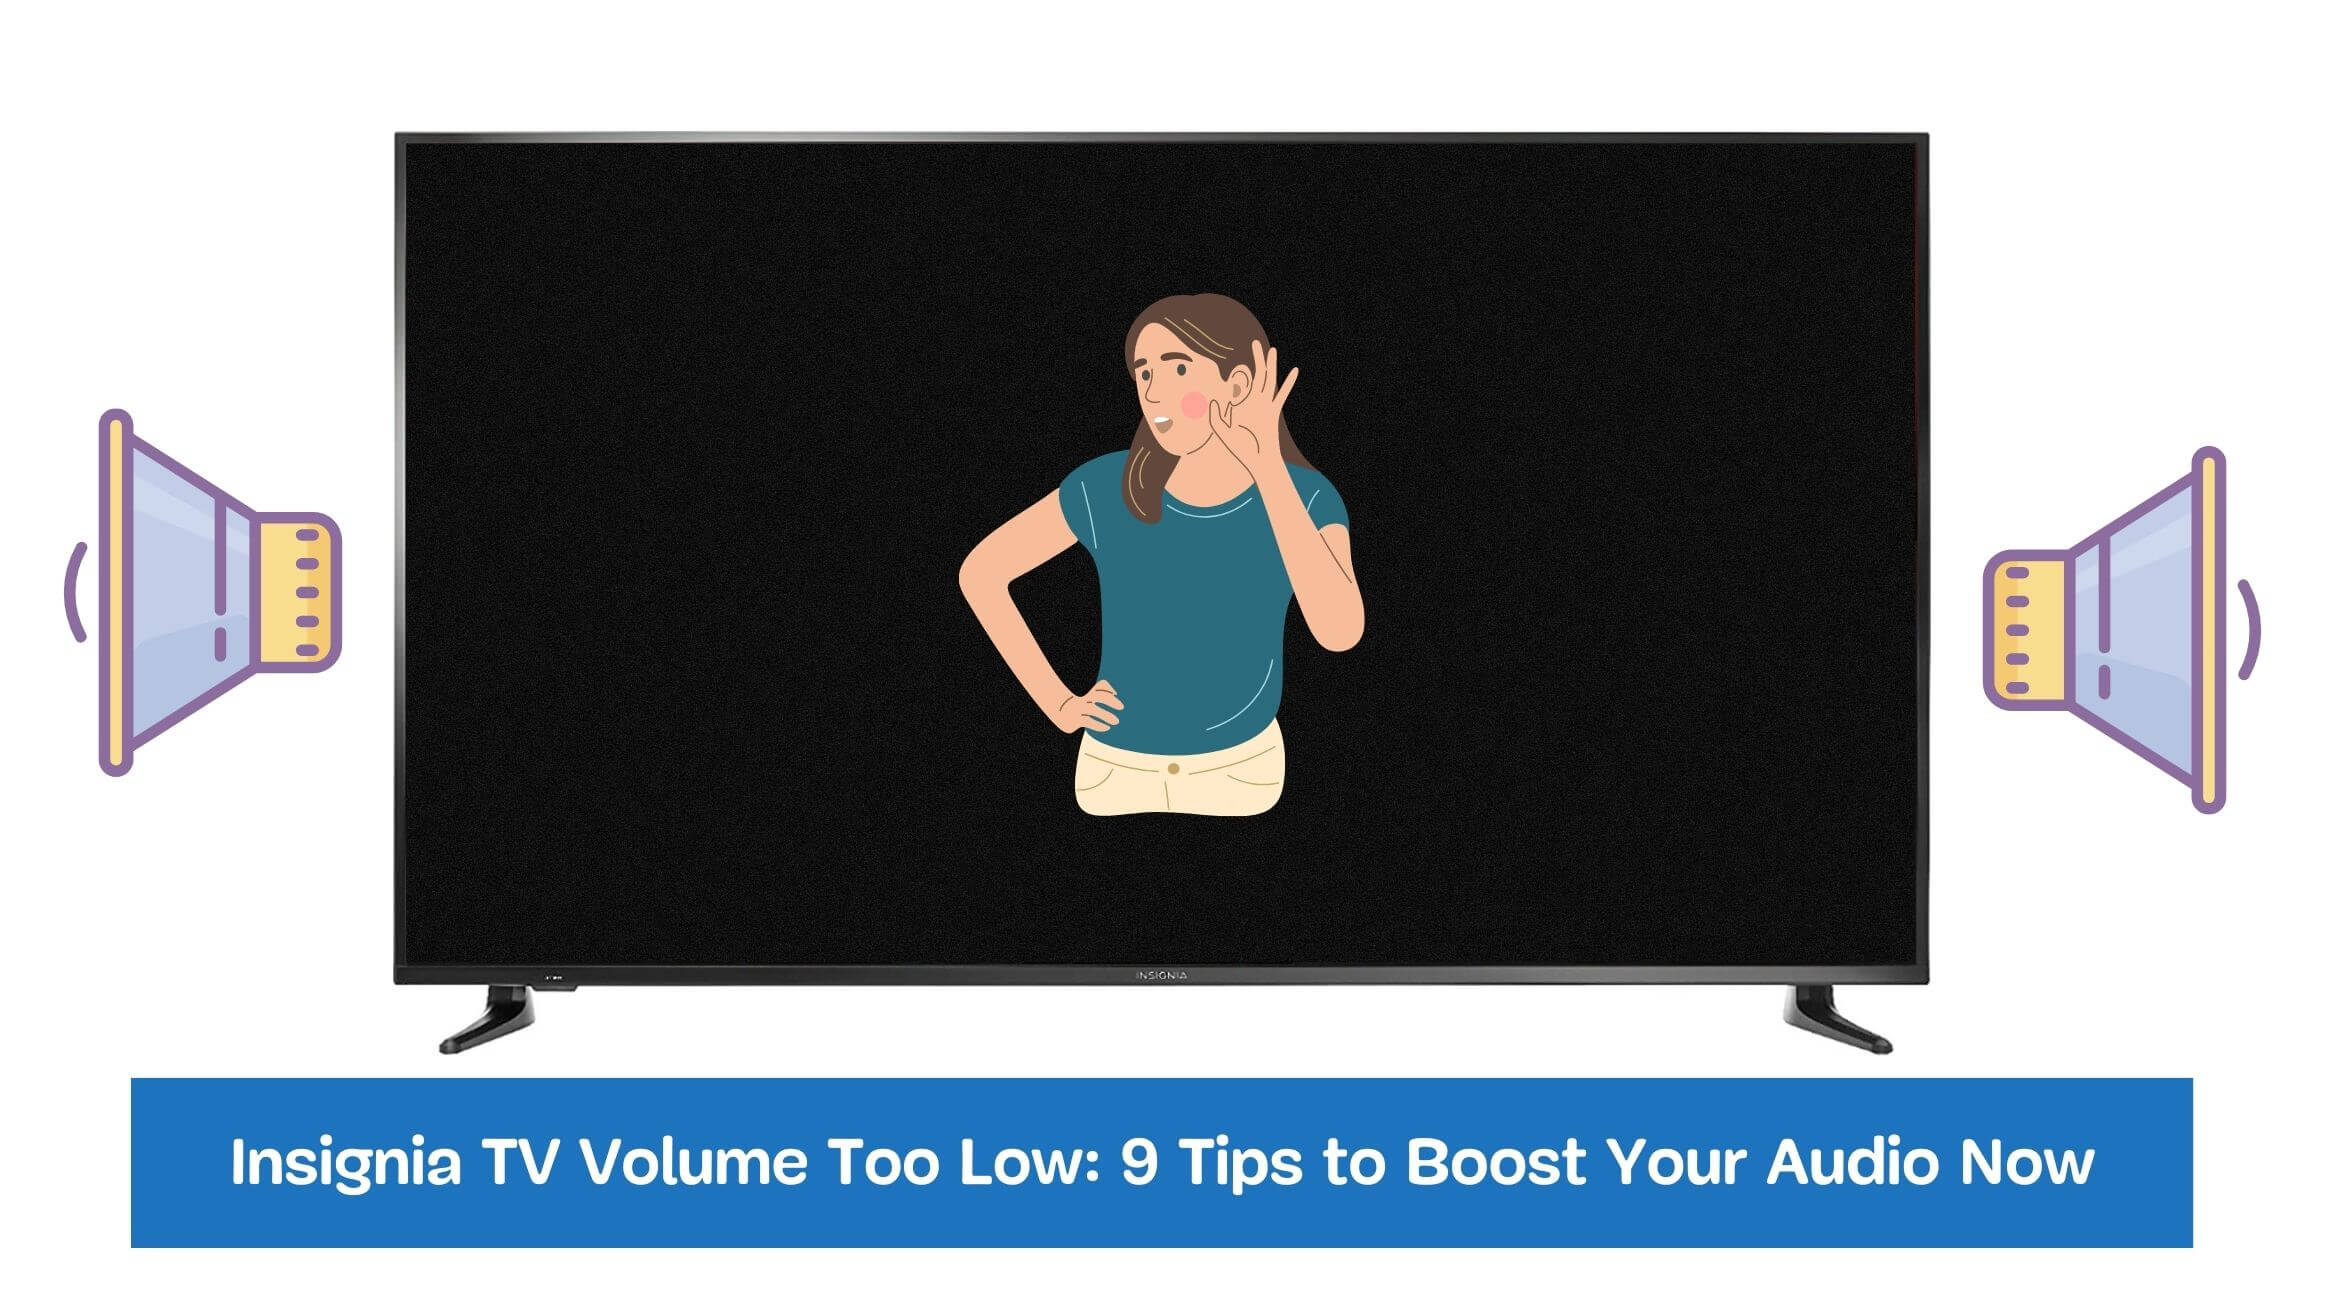 Insignia TV Volume Too Low: 9 Tips to Boost Your Audio Now